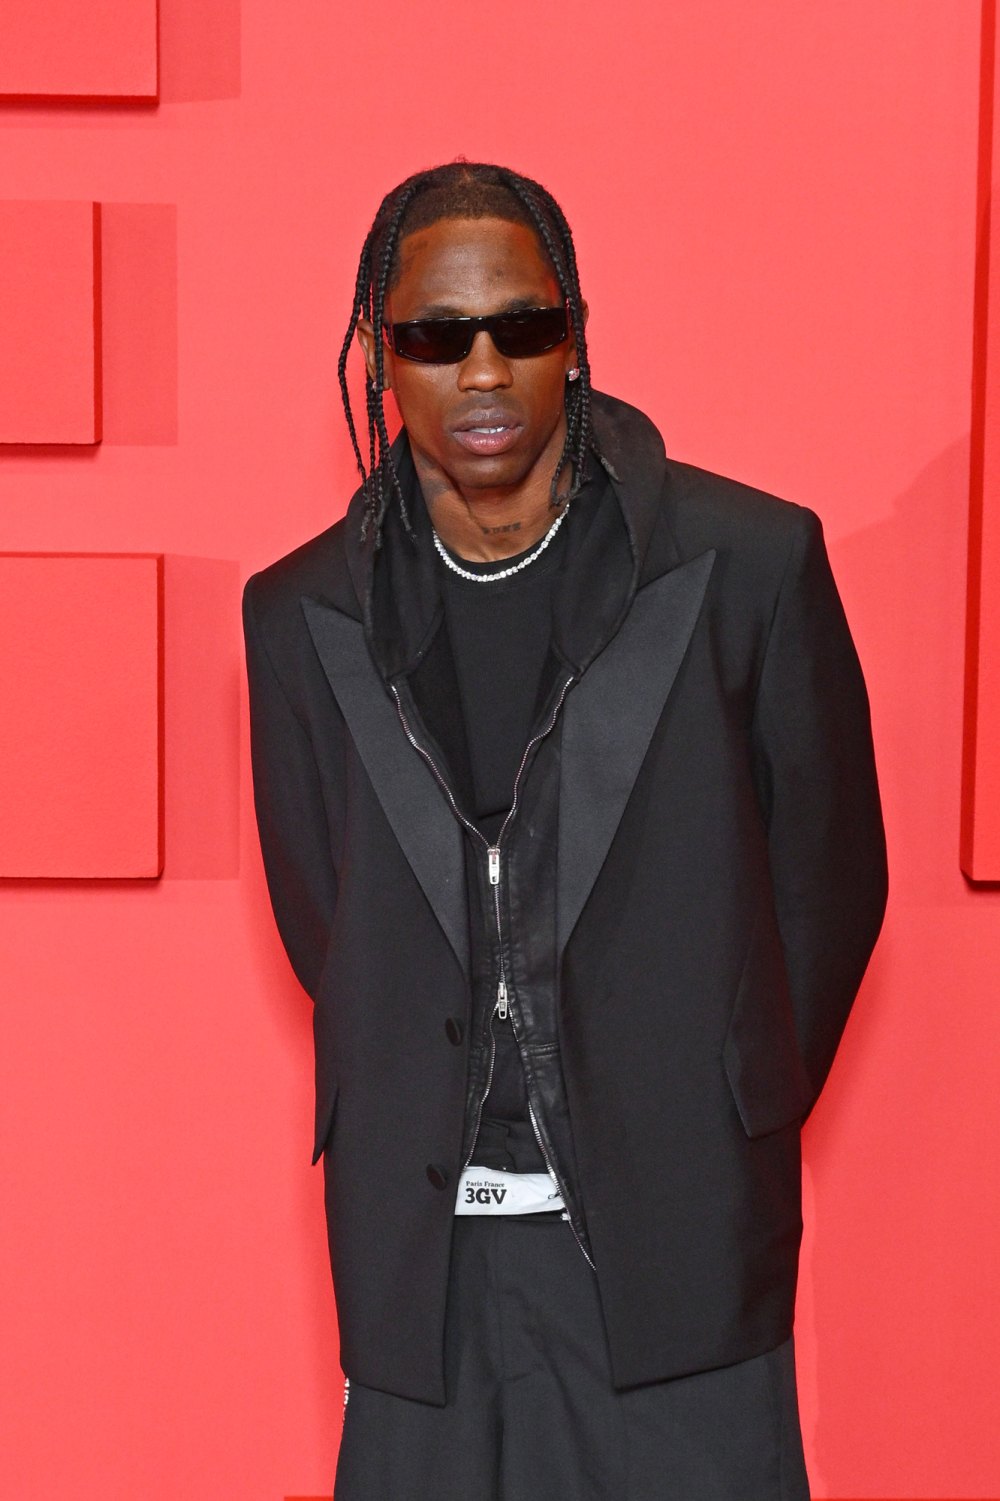 Travis Scott questioned for eight hours in court regarding Astroworld festival lawsuits